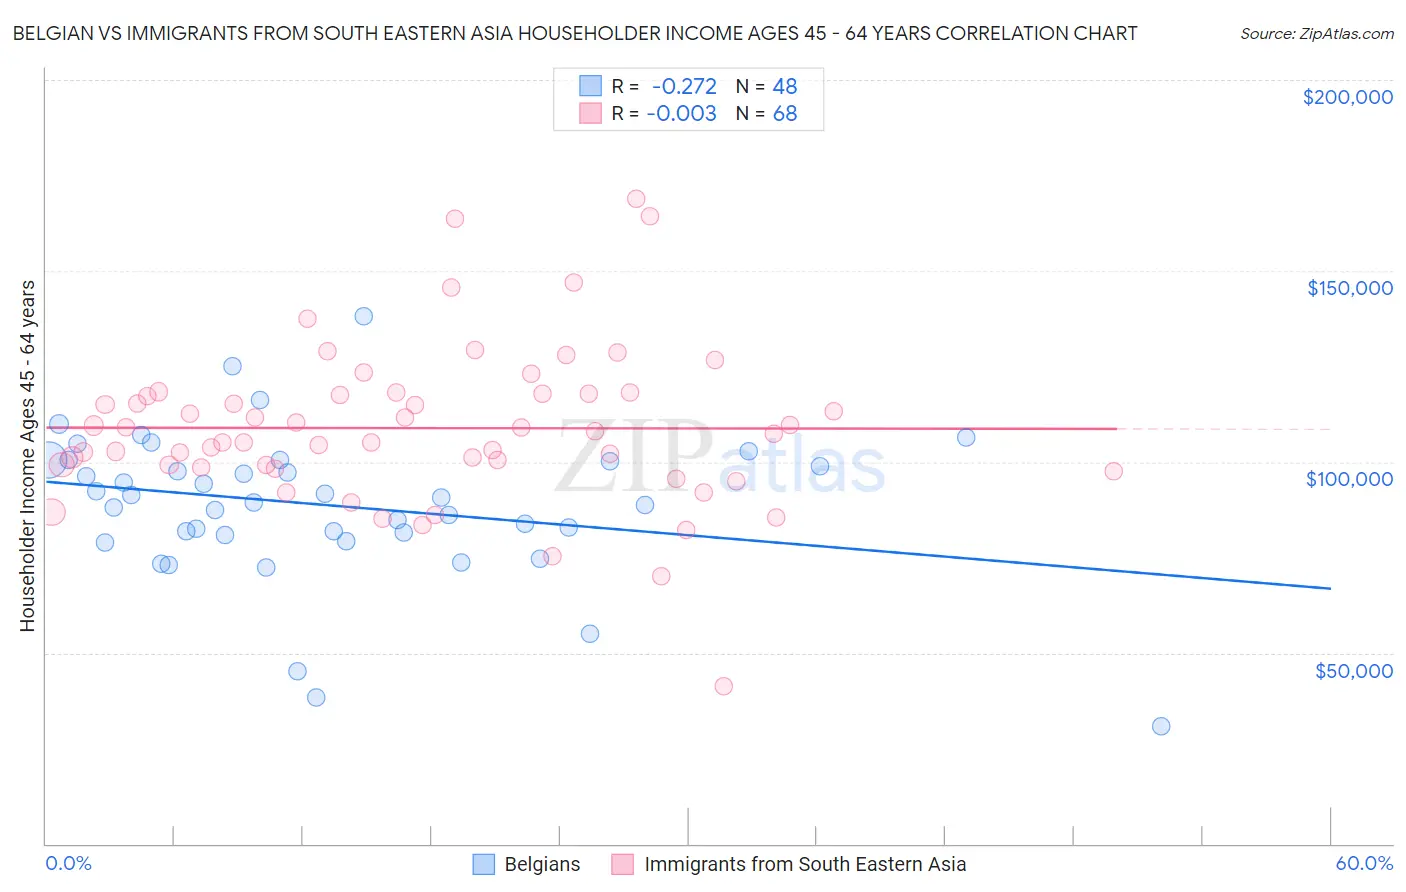 Belgian vs Immigrants from South Eastern Asia Householder Income Ages 45 - 64 years